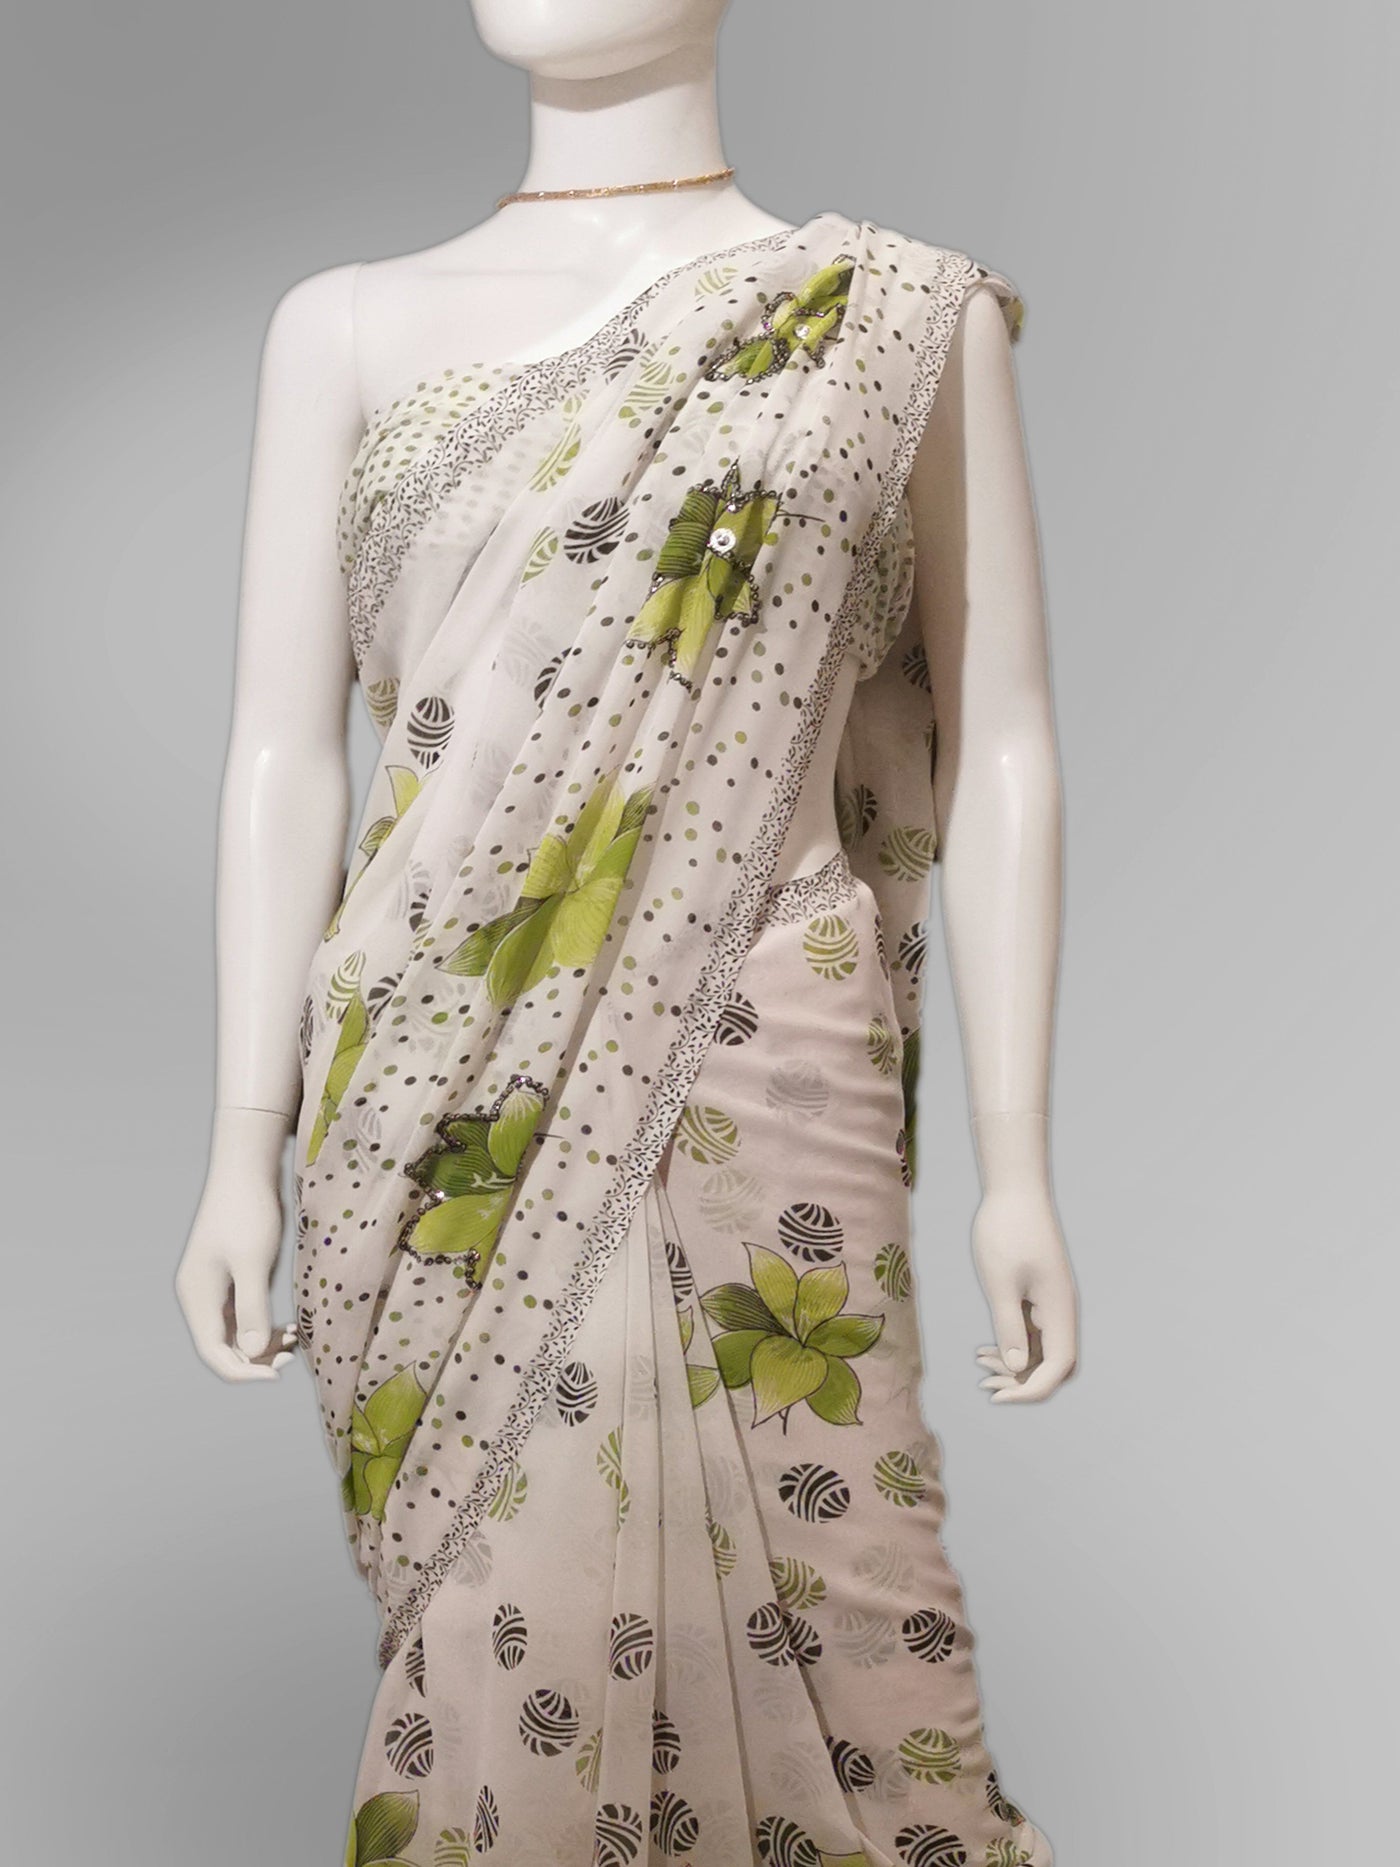 Saree in White and Green Floral Featured with Sequin Work - Indian Clothing in Denver, CO, Aurora, CO, Boulder, CO, Fort Collins, CO, Colorado Springs, CO, Parker, CO, Highlands Ranch, CO, Cherry Creek, CO, Centennial, CO, and Longmont, CO. Nationwide shipping USA - India Fashion X